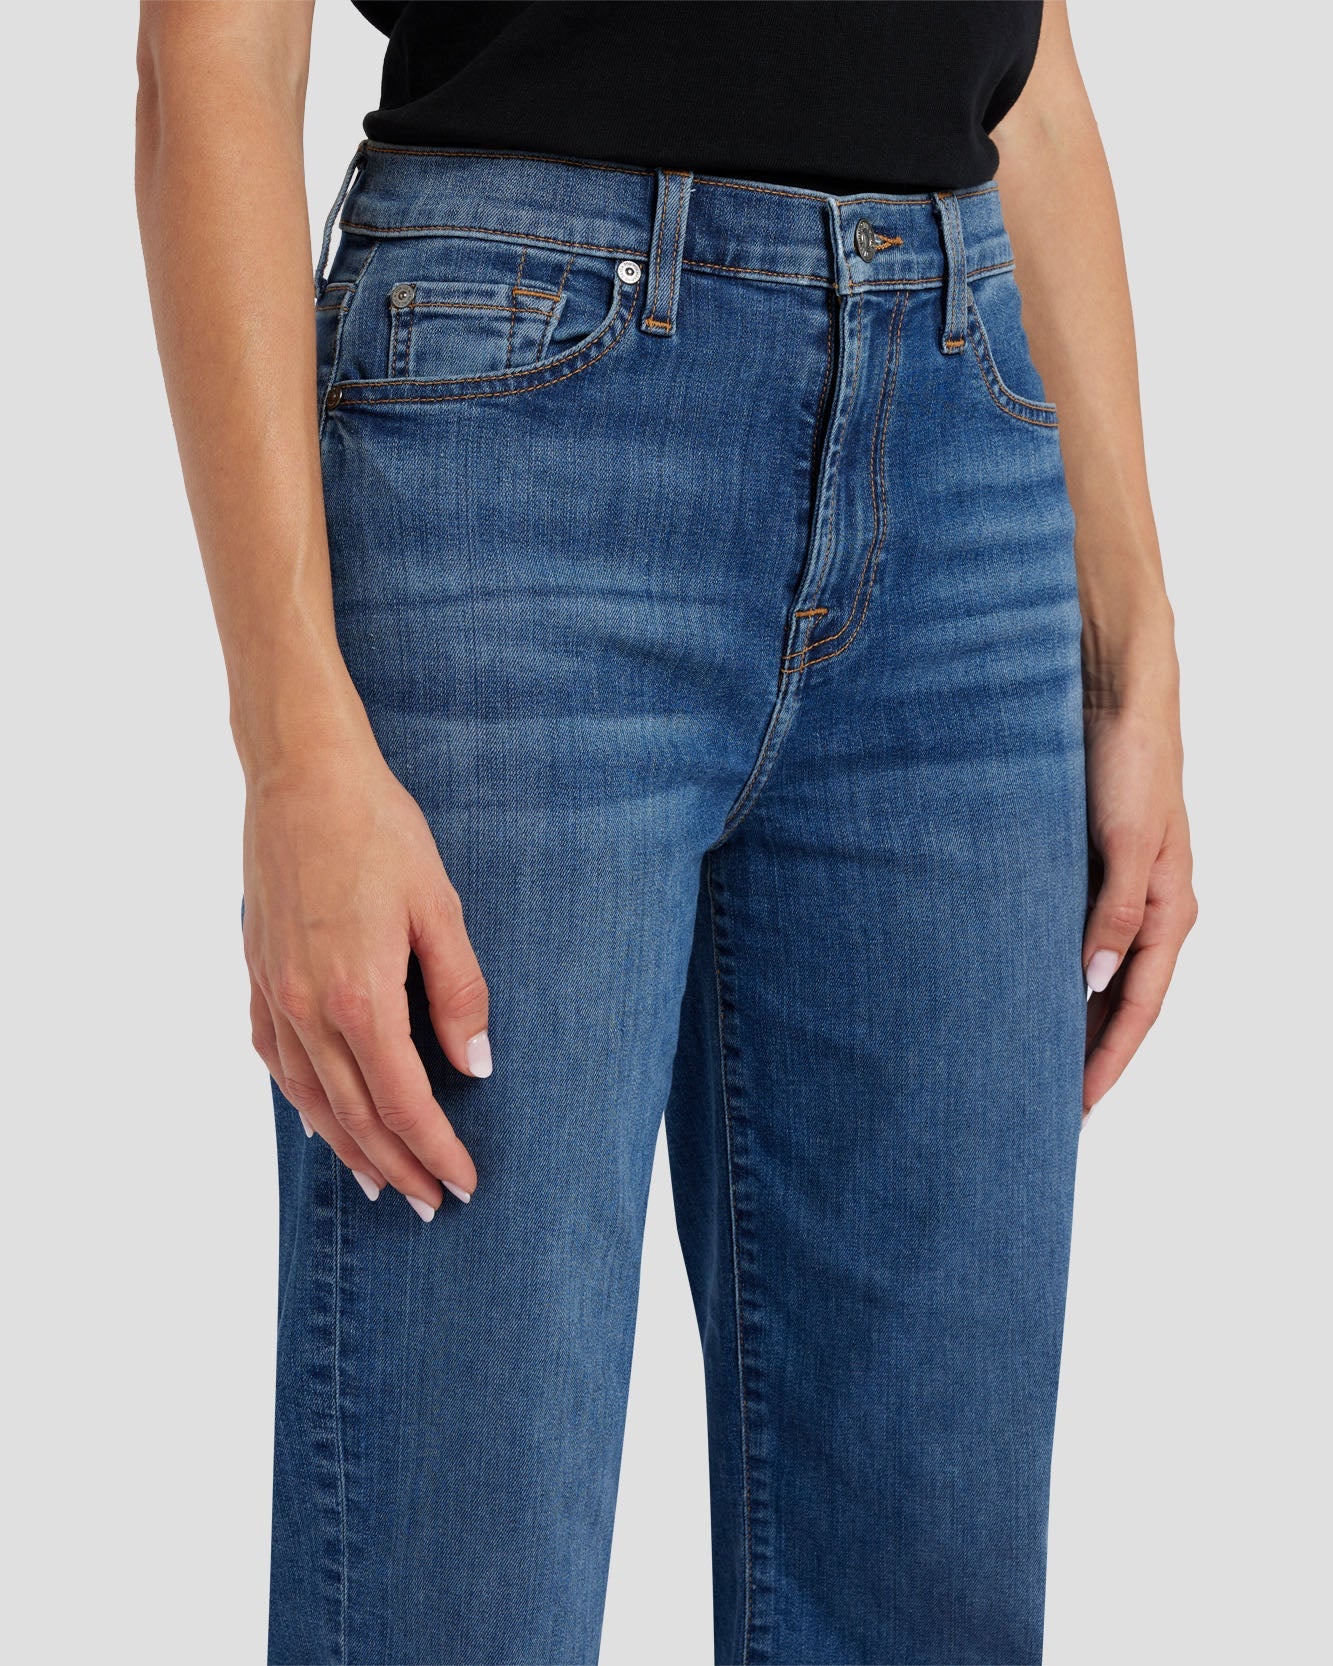 Cropped Alexa Jeans